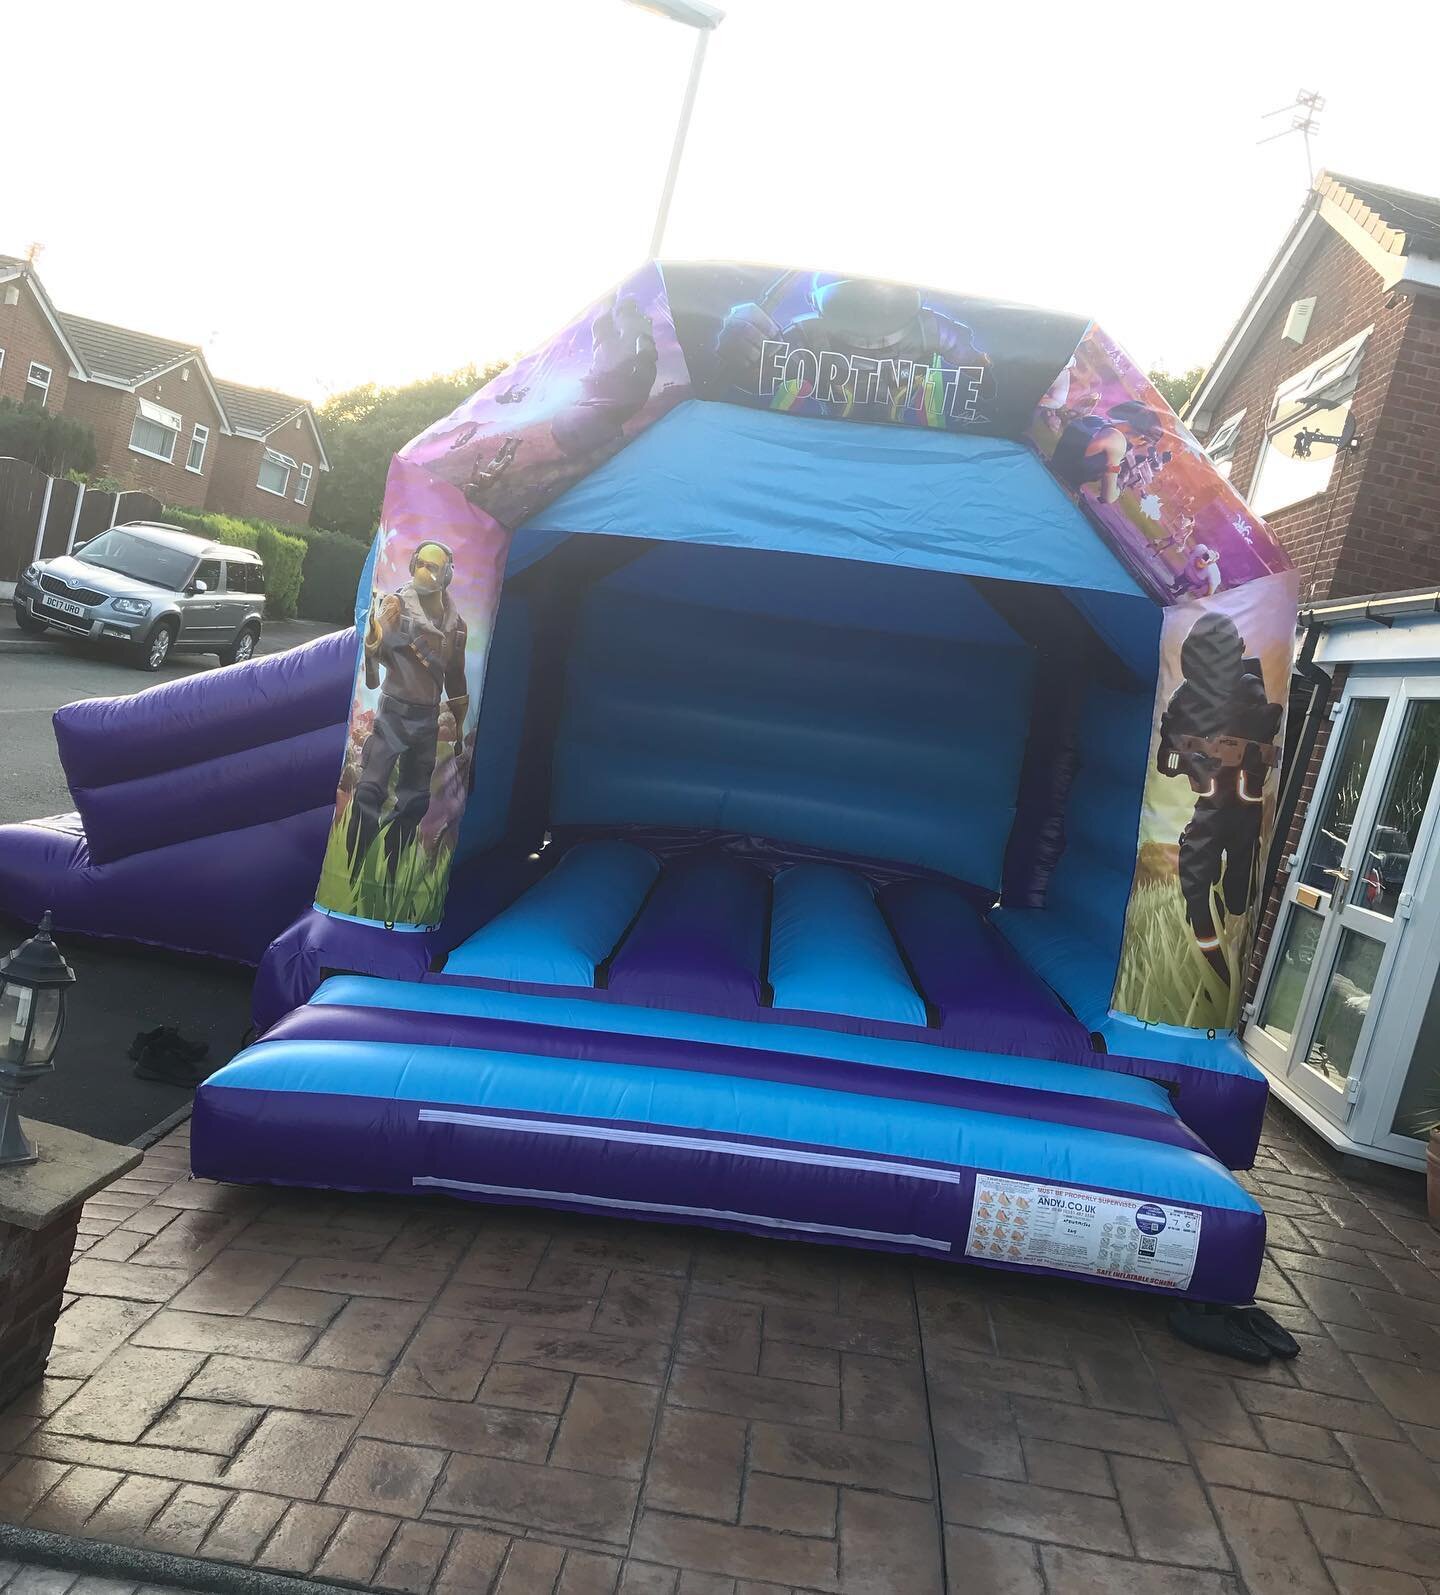 We now have fortnite castle with the slide available to rent this week